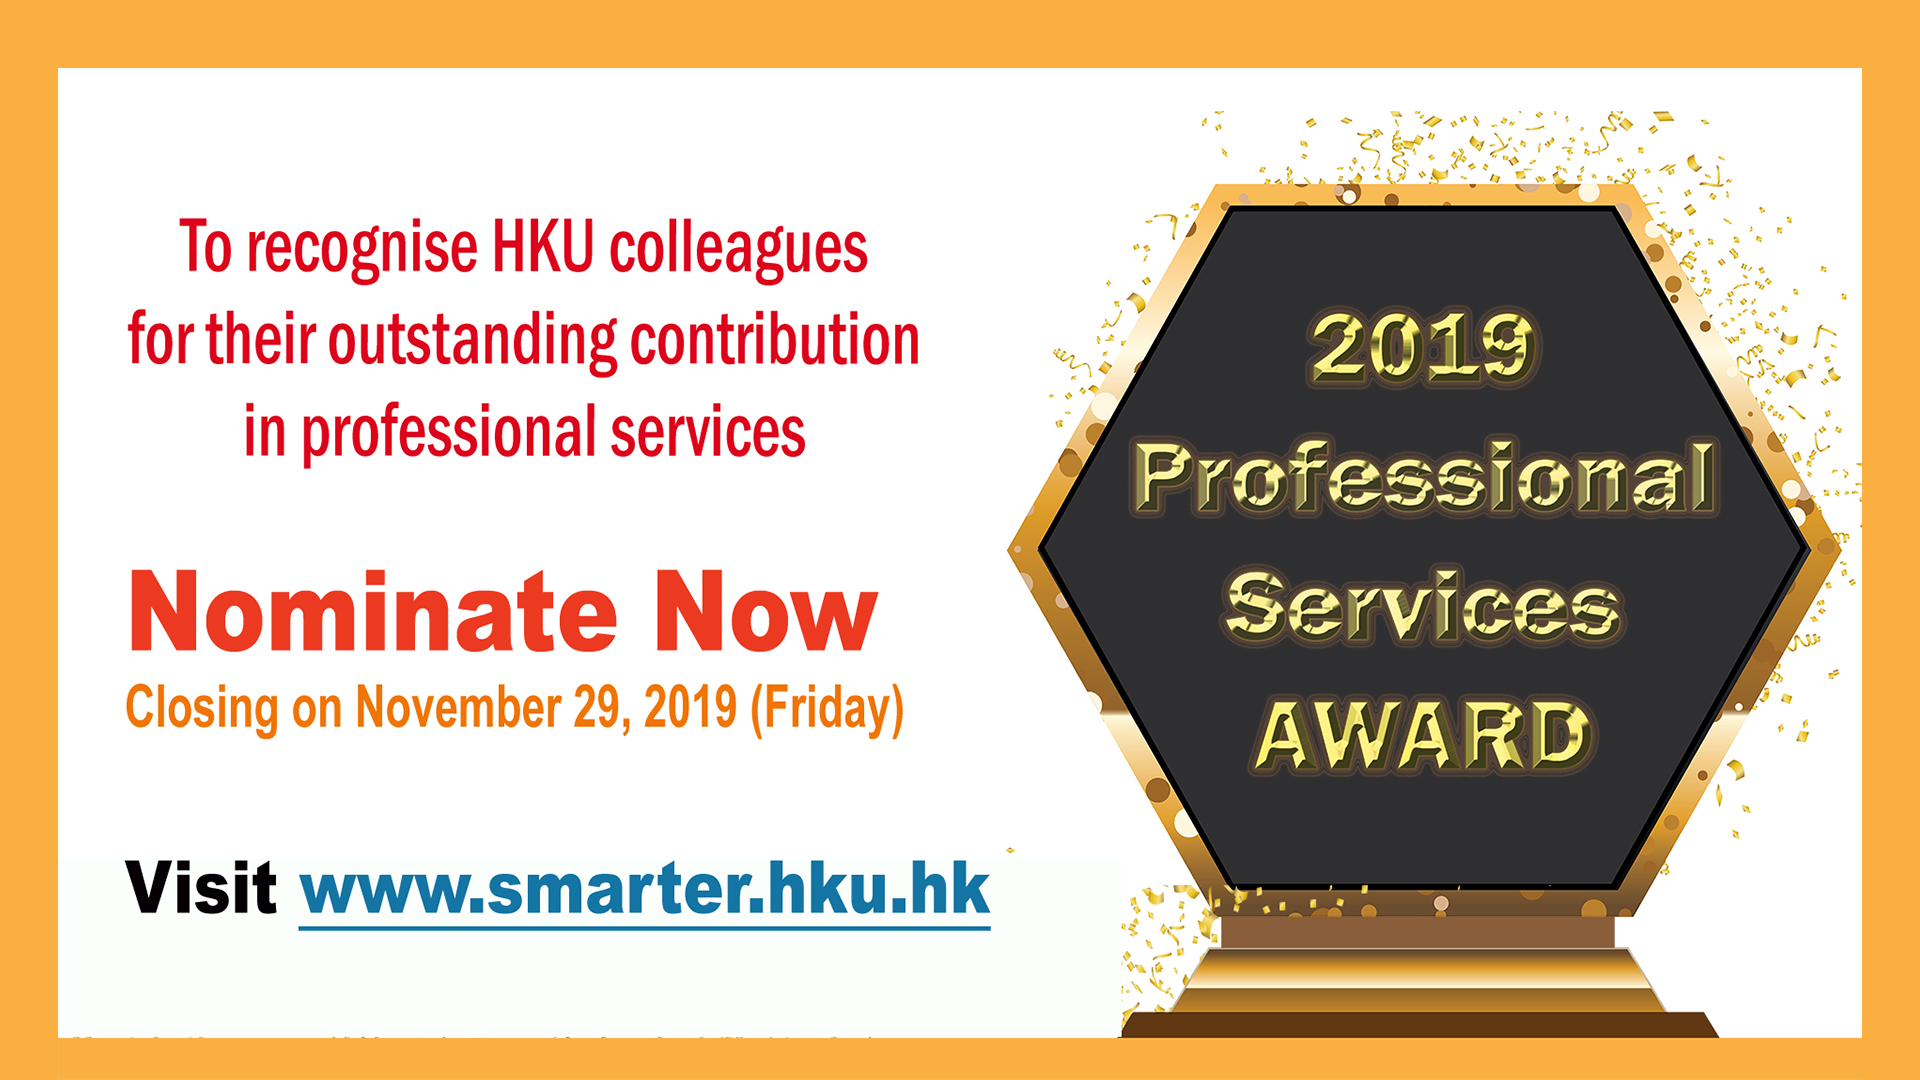 The Professional Services Award 2019